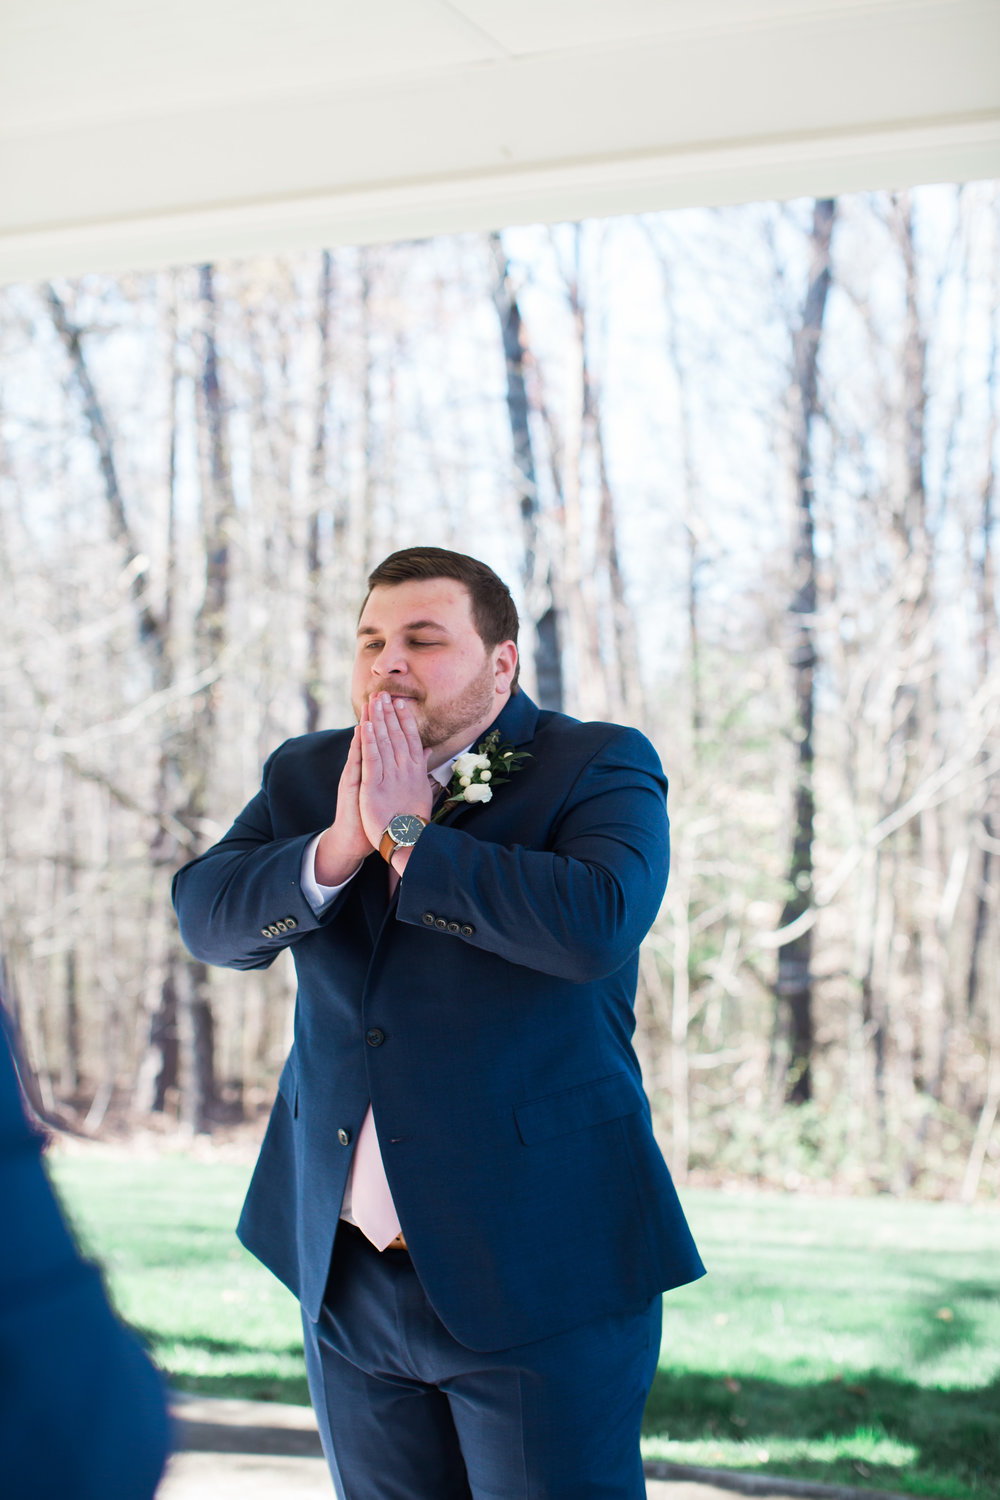 Groom Overwhelmed at seeing the beauty of the Bride